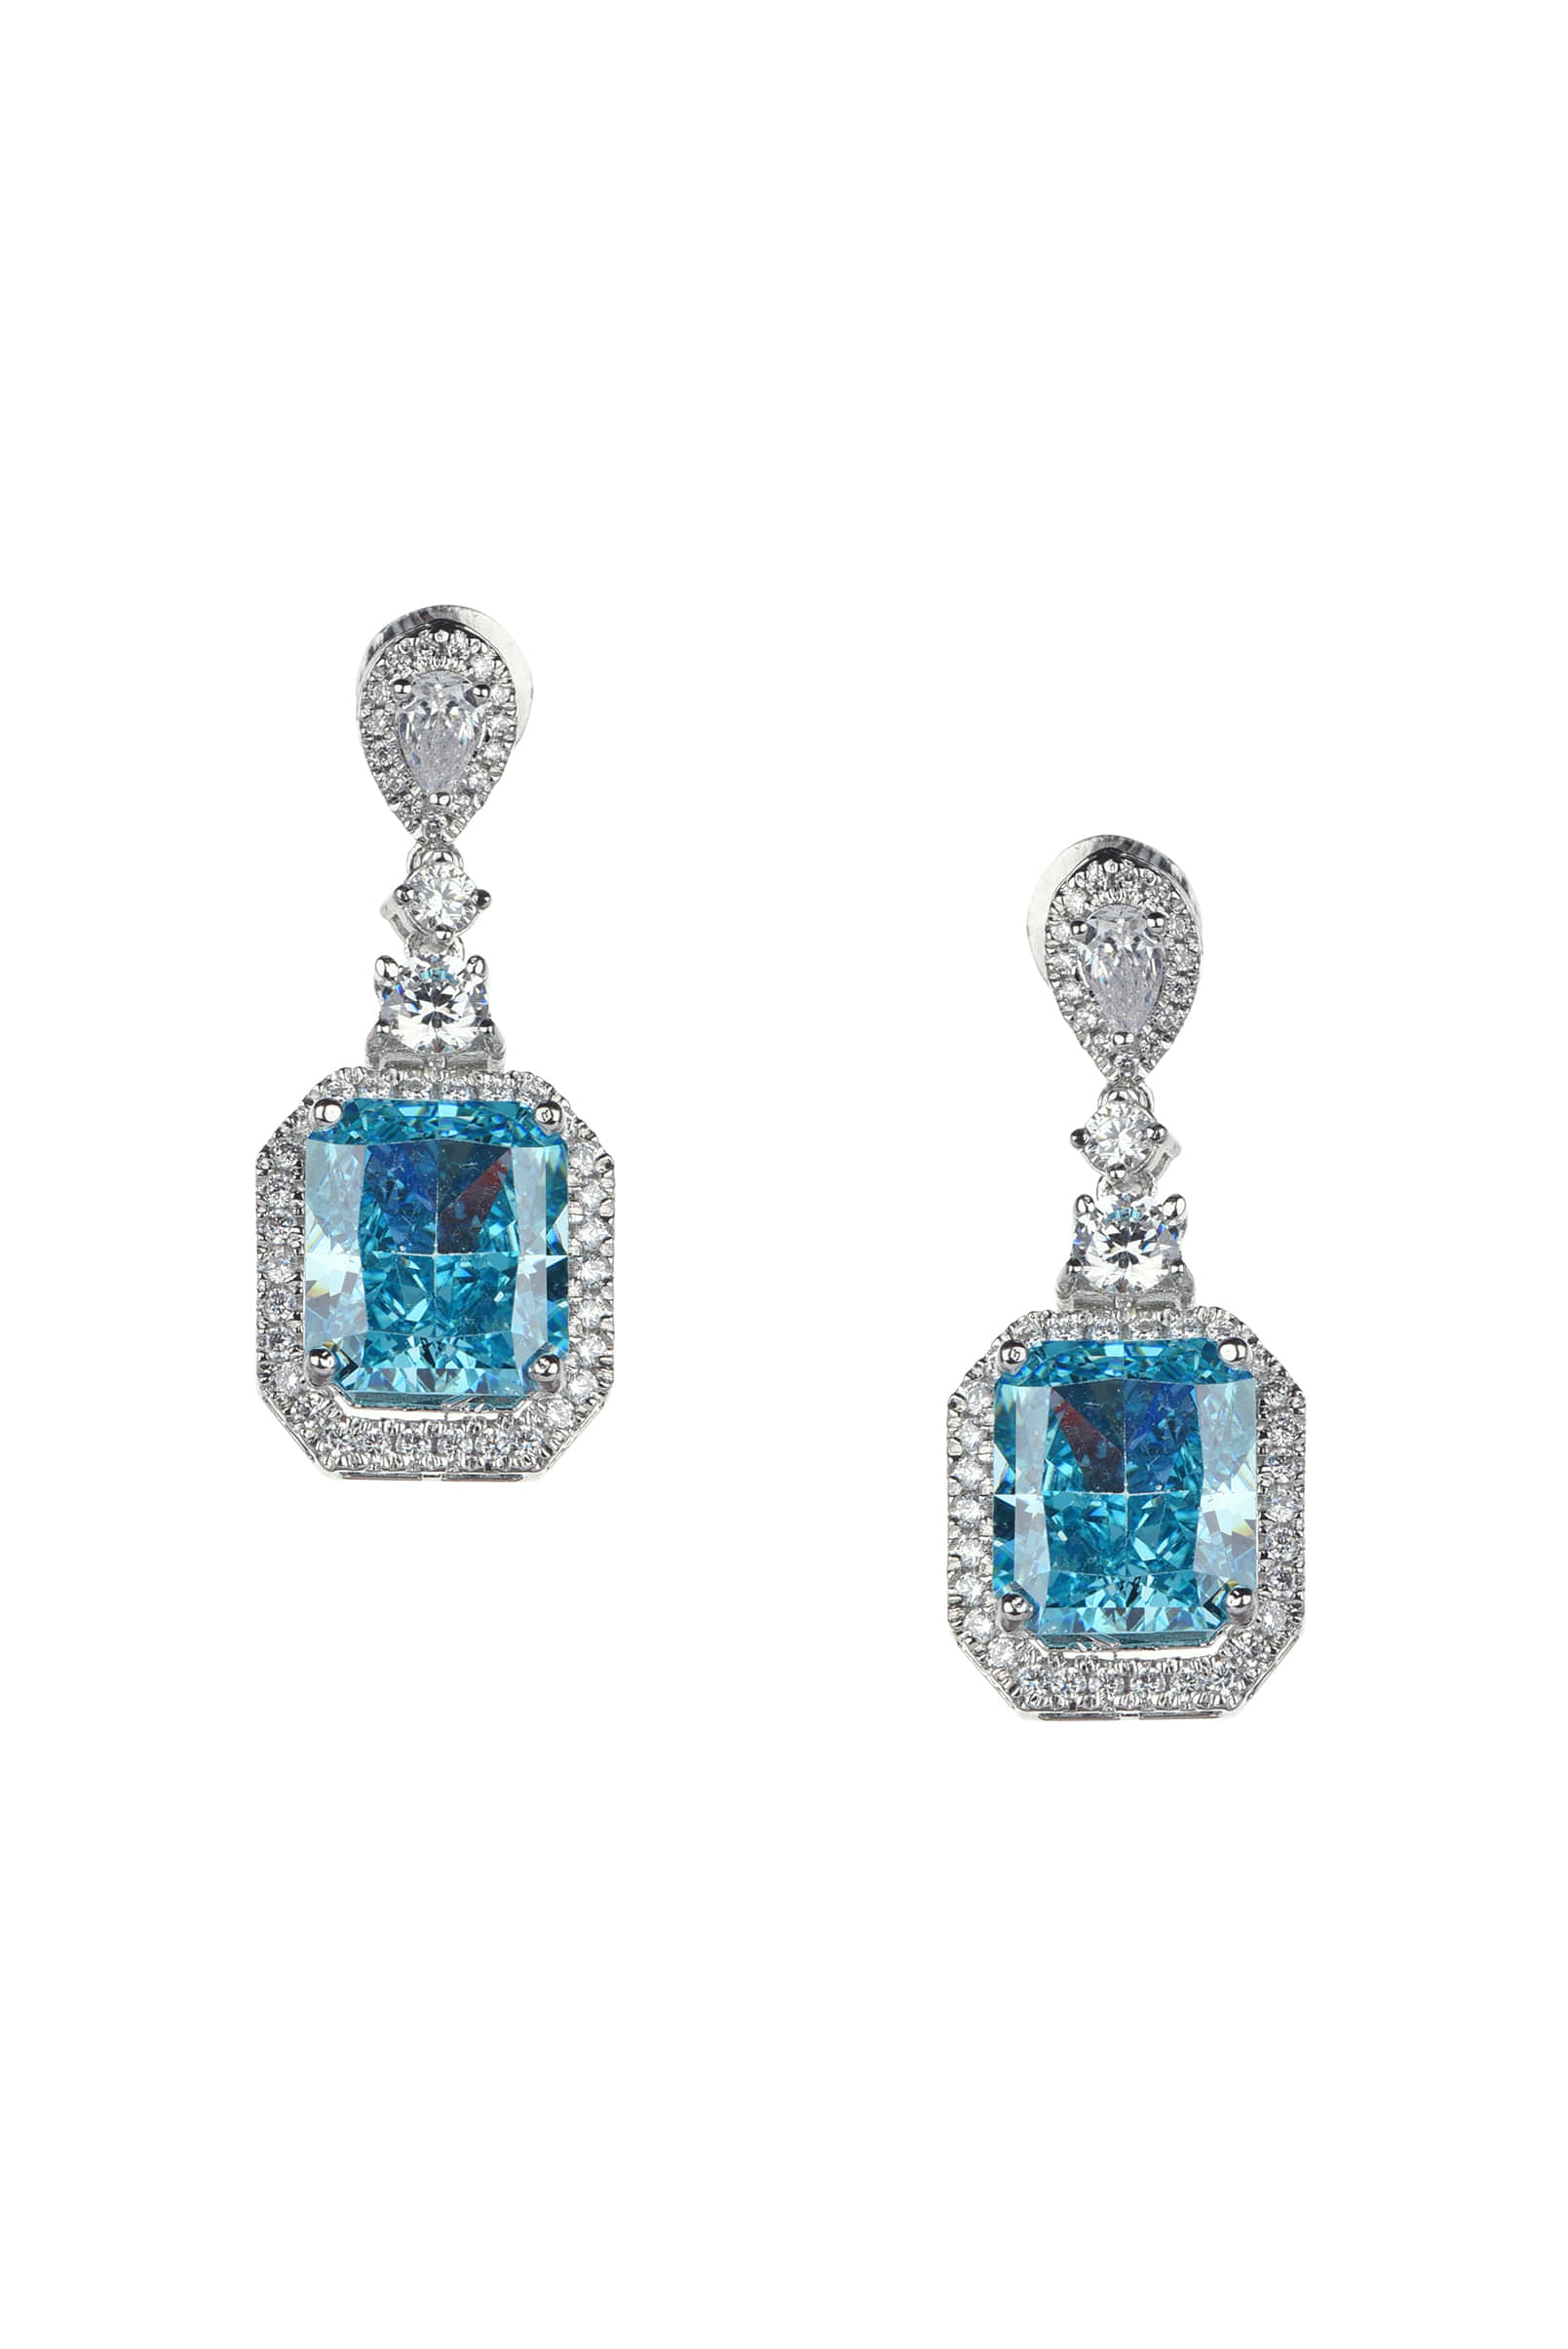 Buy 92.5 Sterling Silver Danglers Studded With Aqua Blue-Toned Stone ...